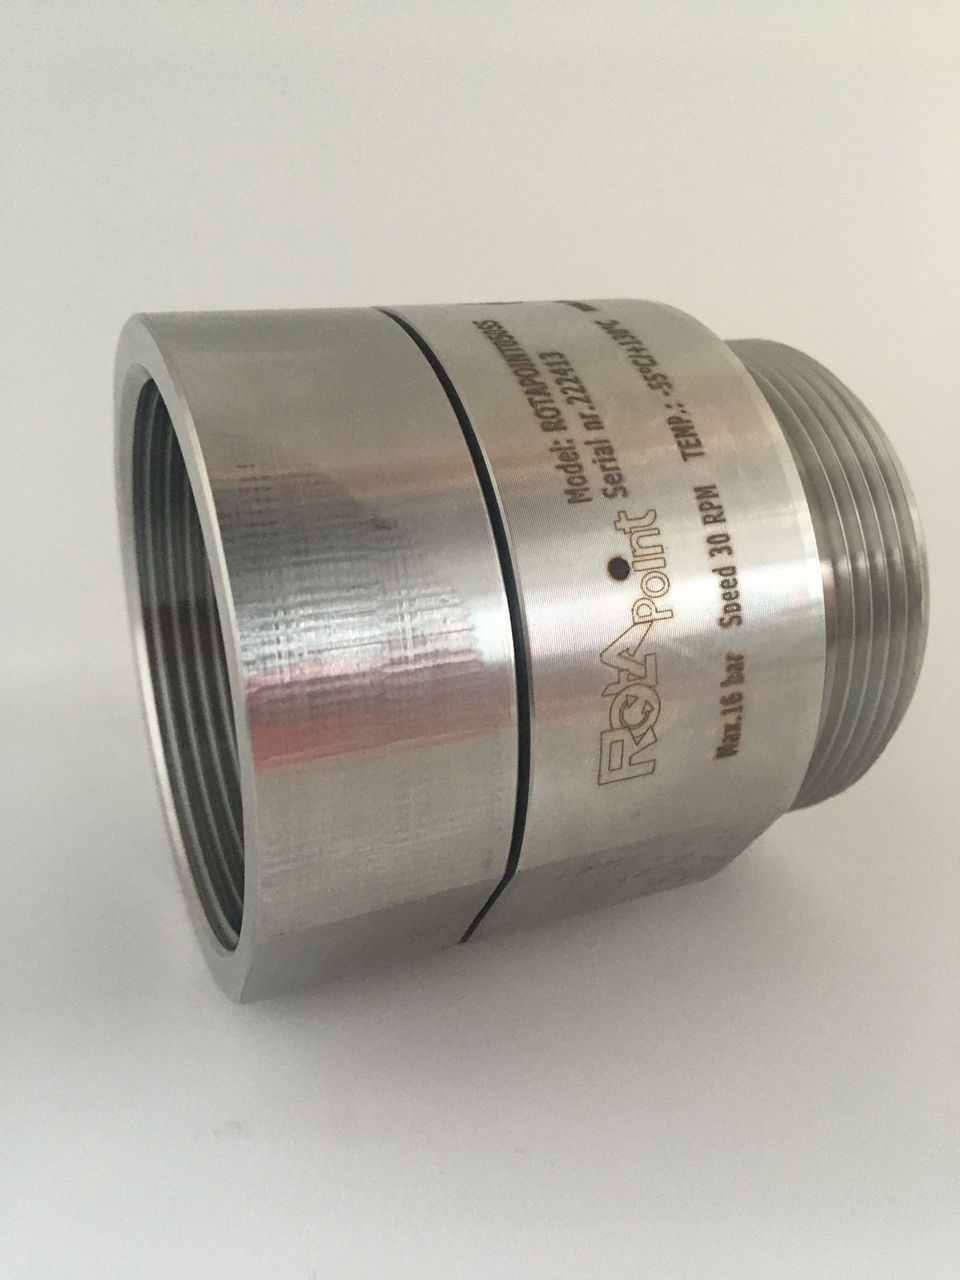 LMC Manufactures Rotapoint® Swivel couplings